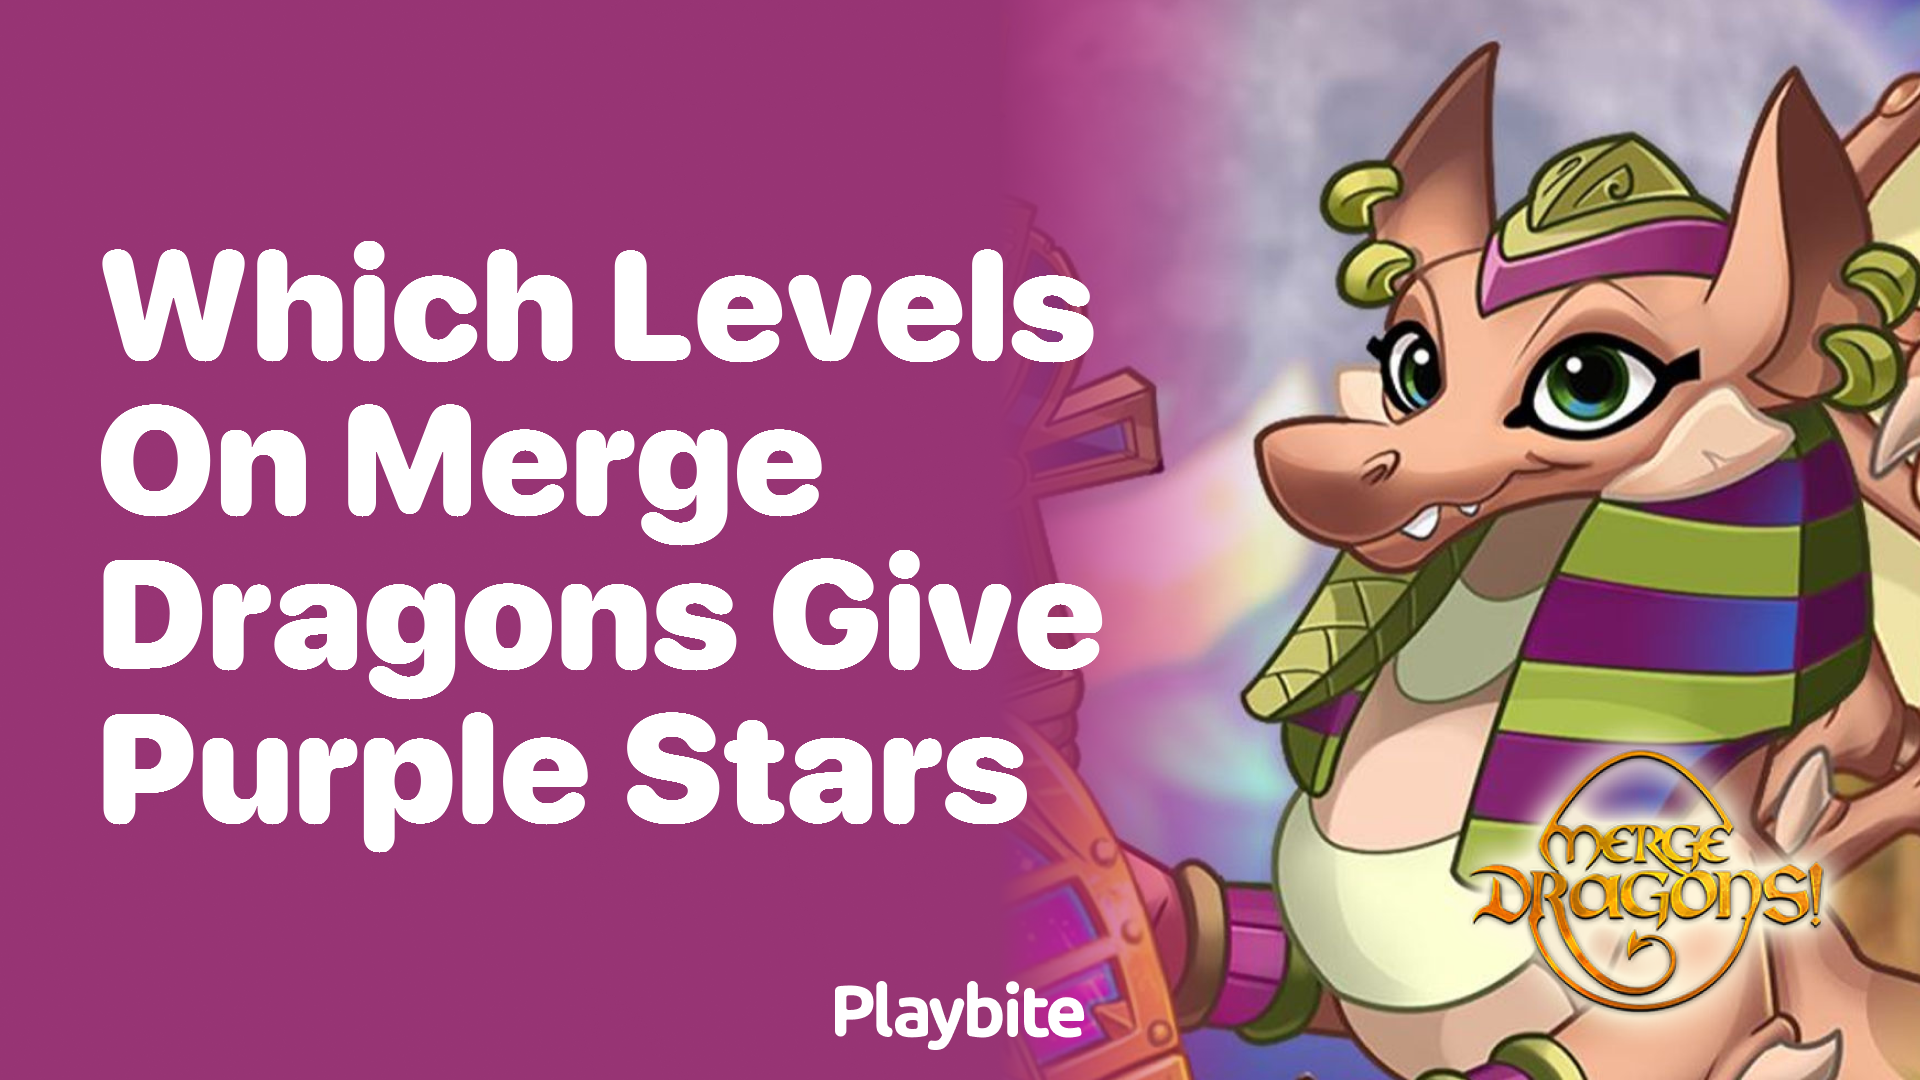 Which levels in Merge Dragons give purple stars?